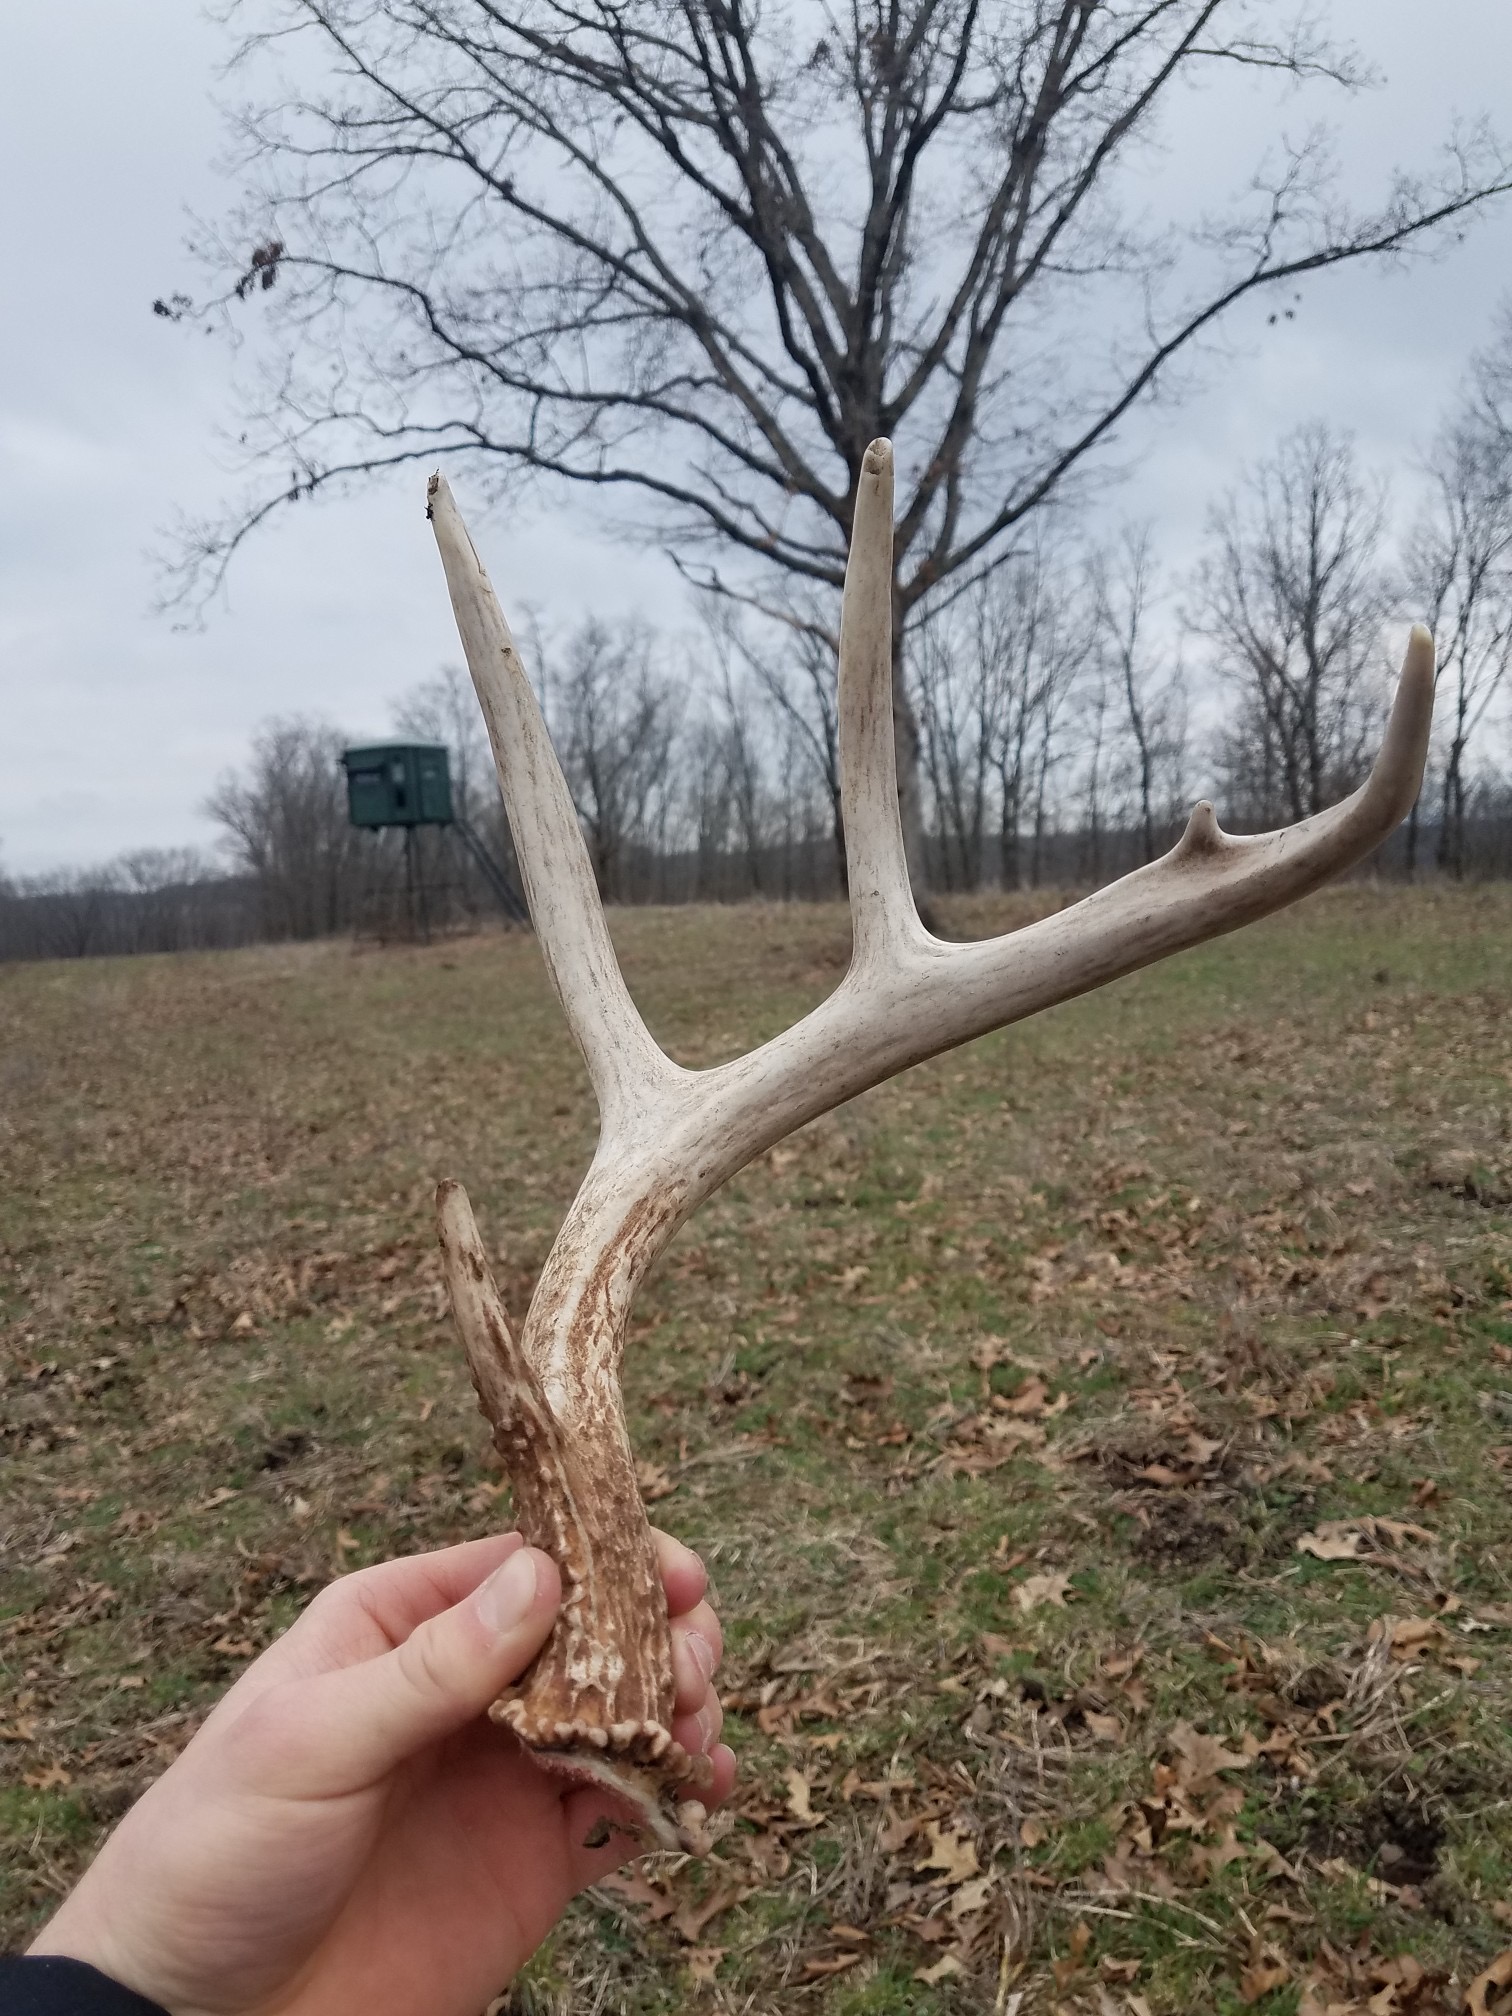 shed antler found in a food plot